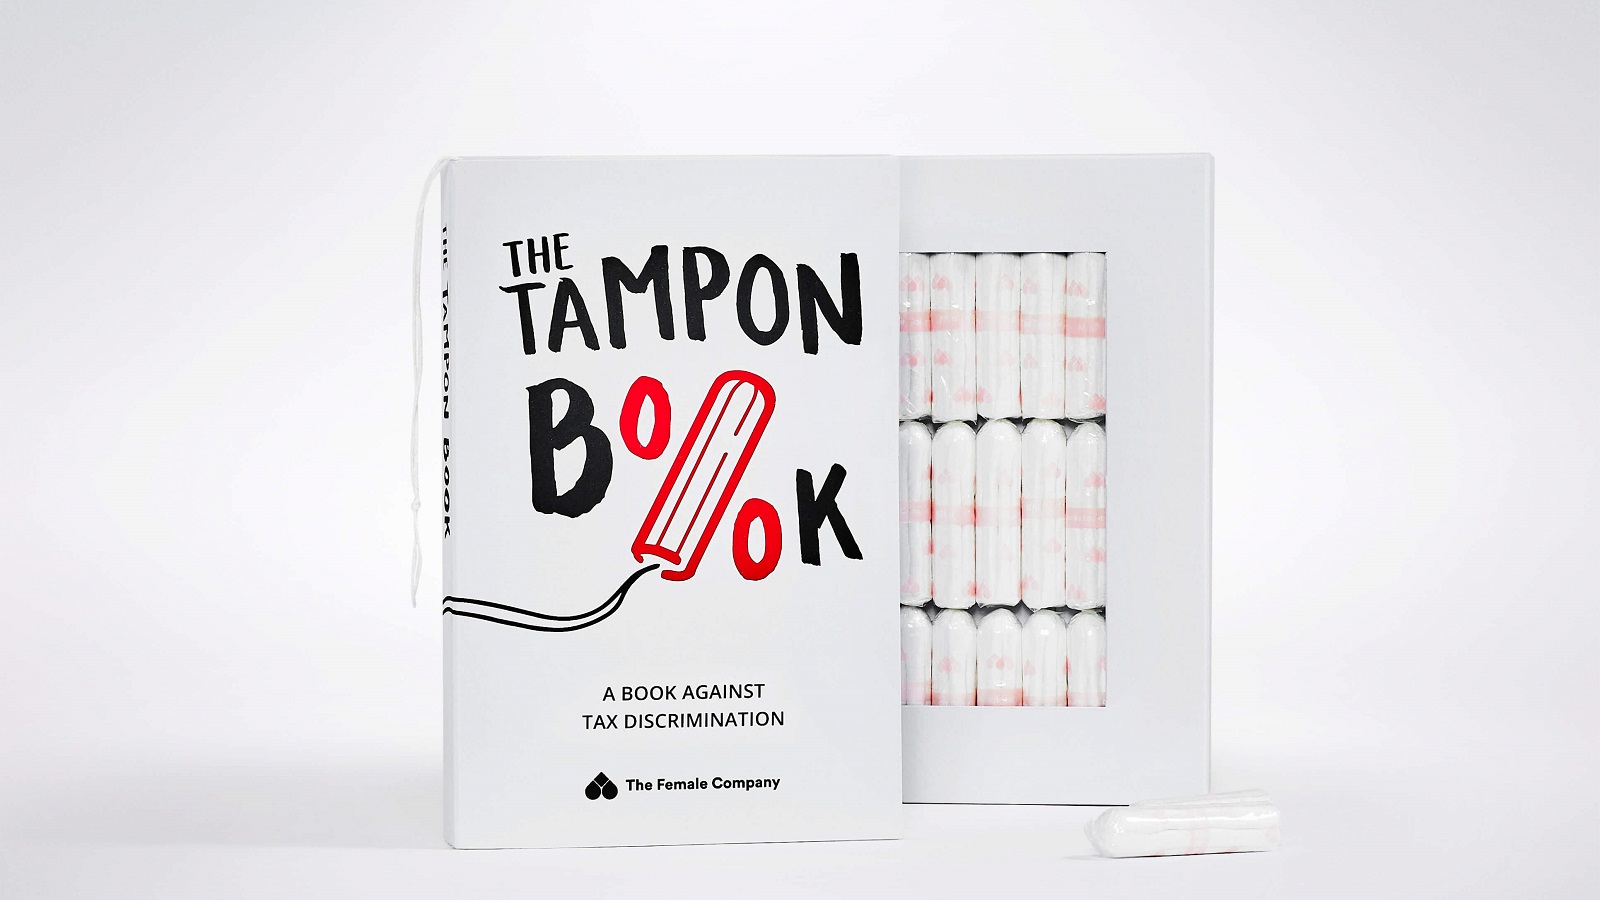 Being a Woman Shouldn’t Be a Luxury, Says the Tampon Book